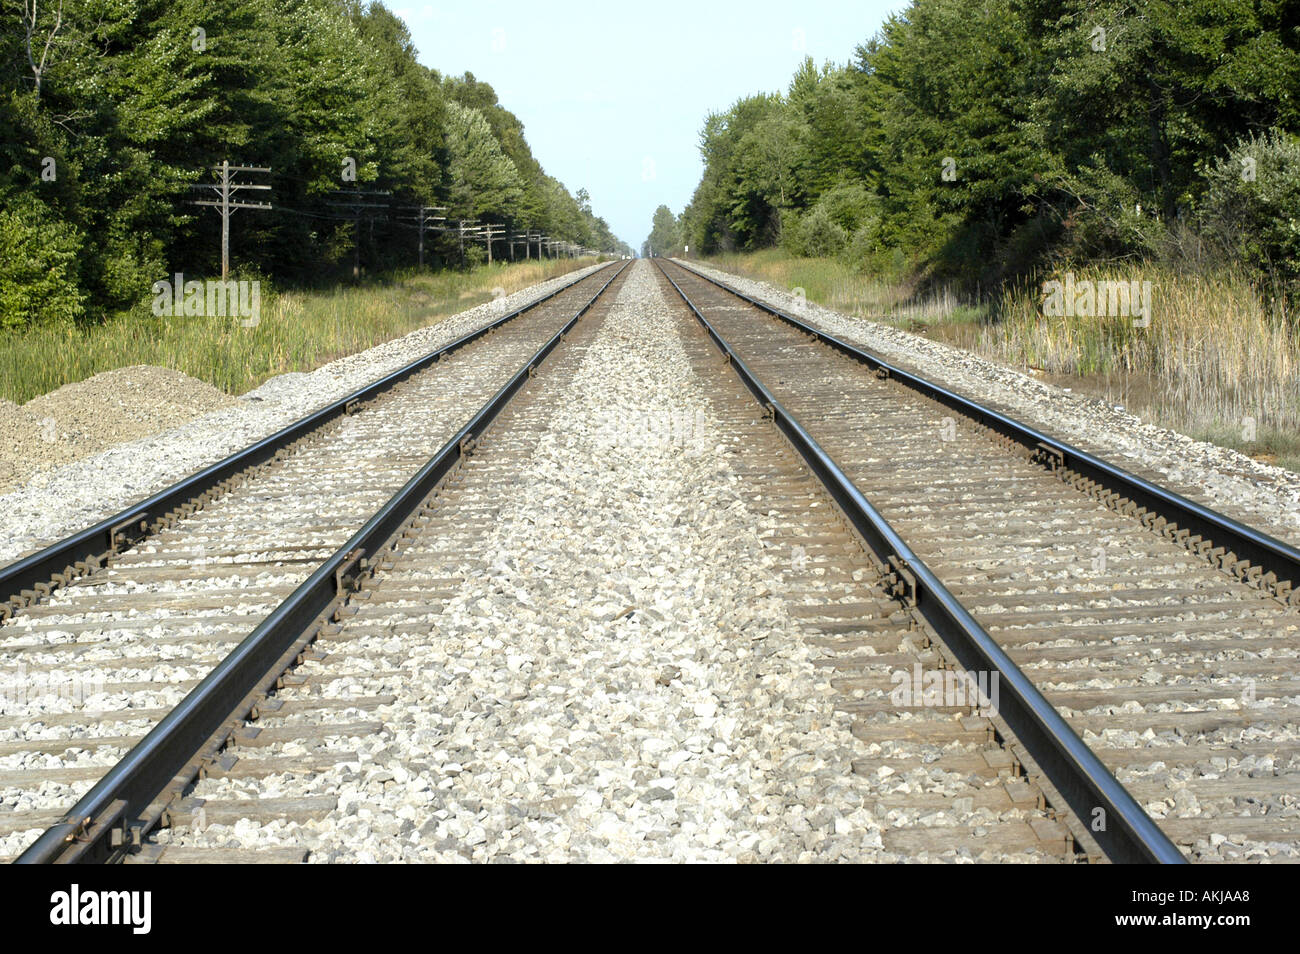 A double set of railroad tracks lead to infinity Stock Photo